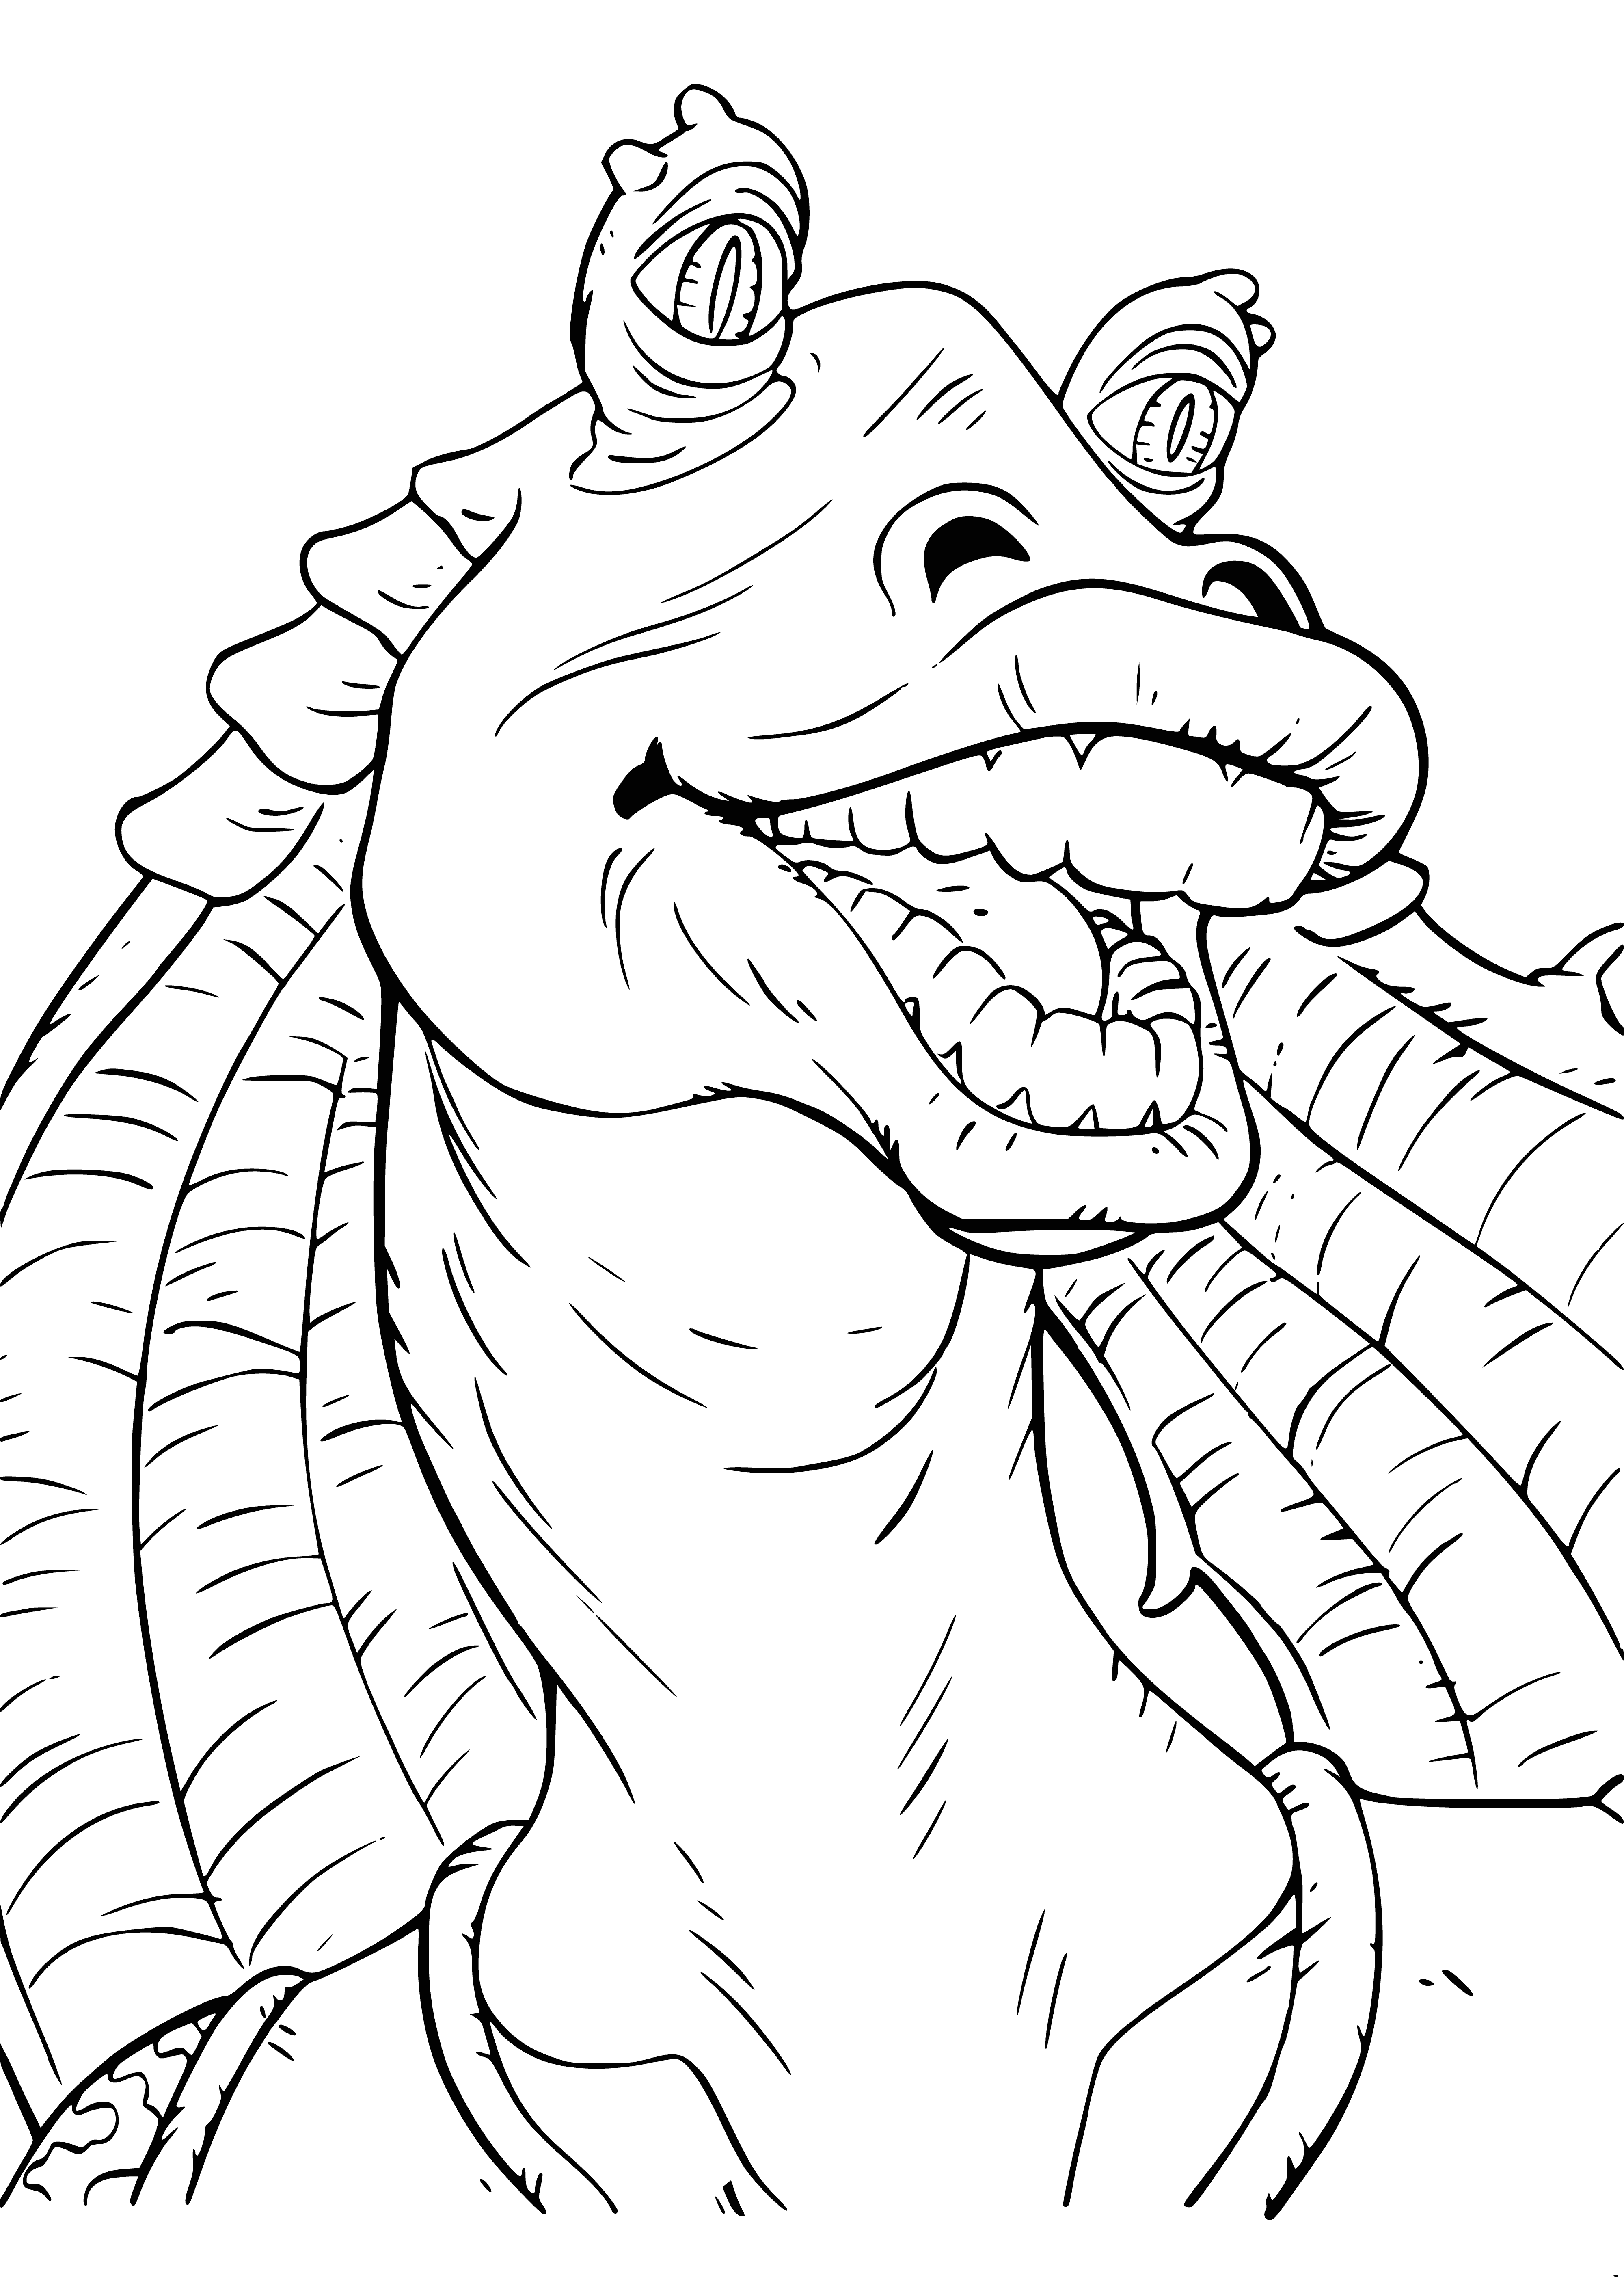 coloring page: Je-Je Binks is a blue gunganen wearing a purple & white outfit standing on a rock in a jungle, with a blue sky & white clouds.